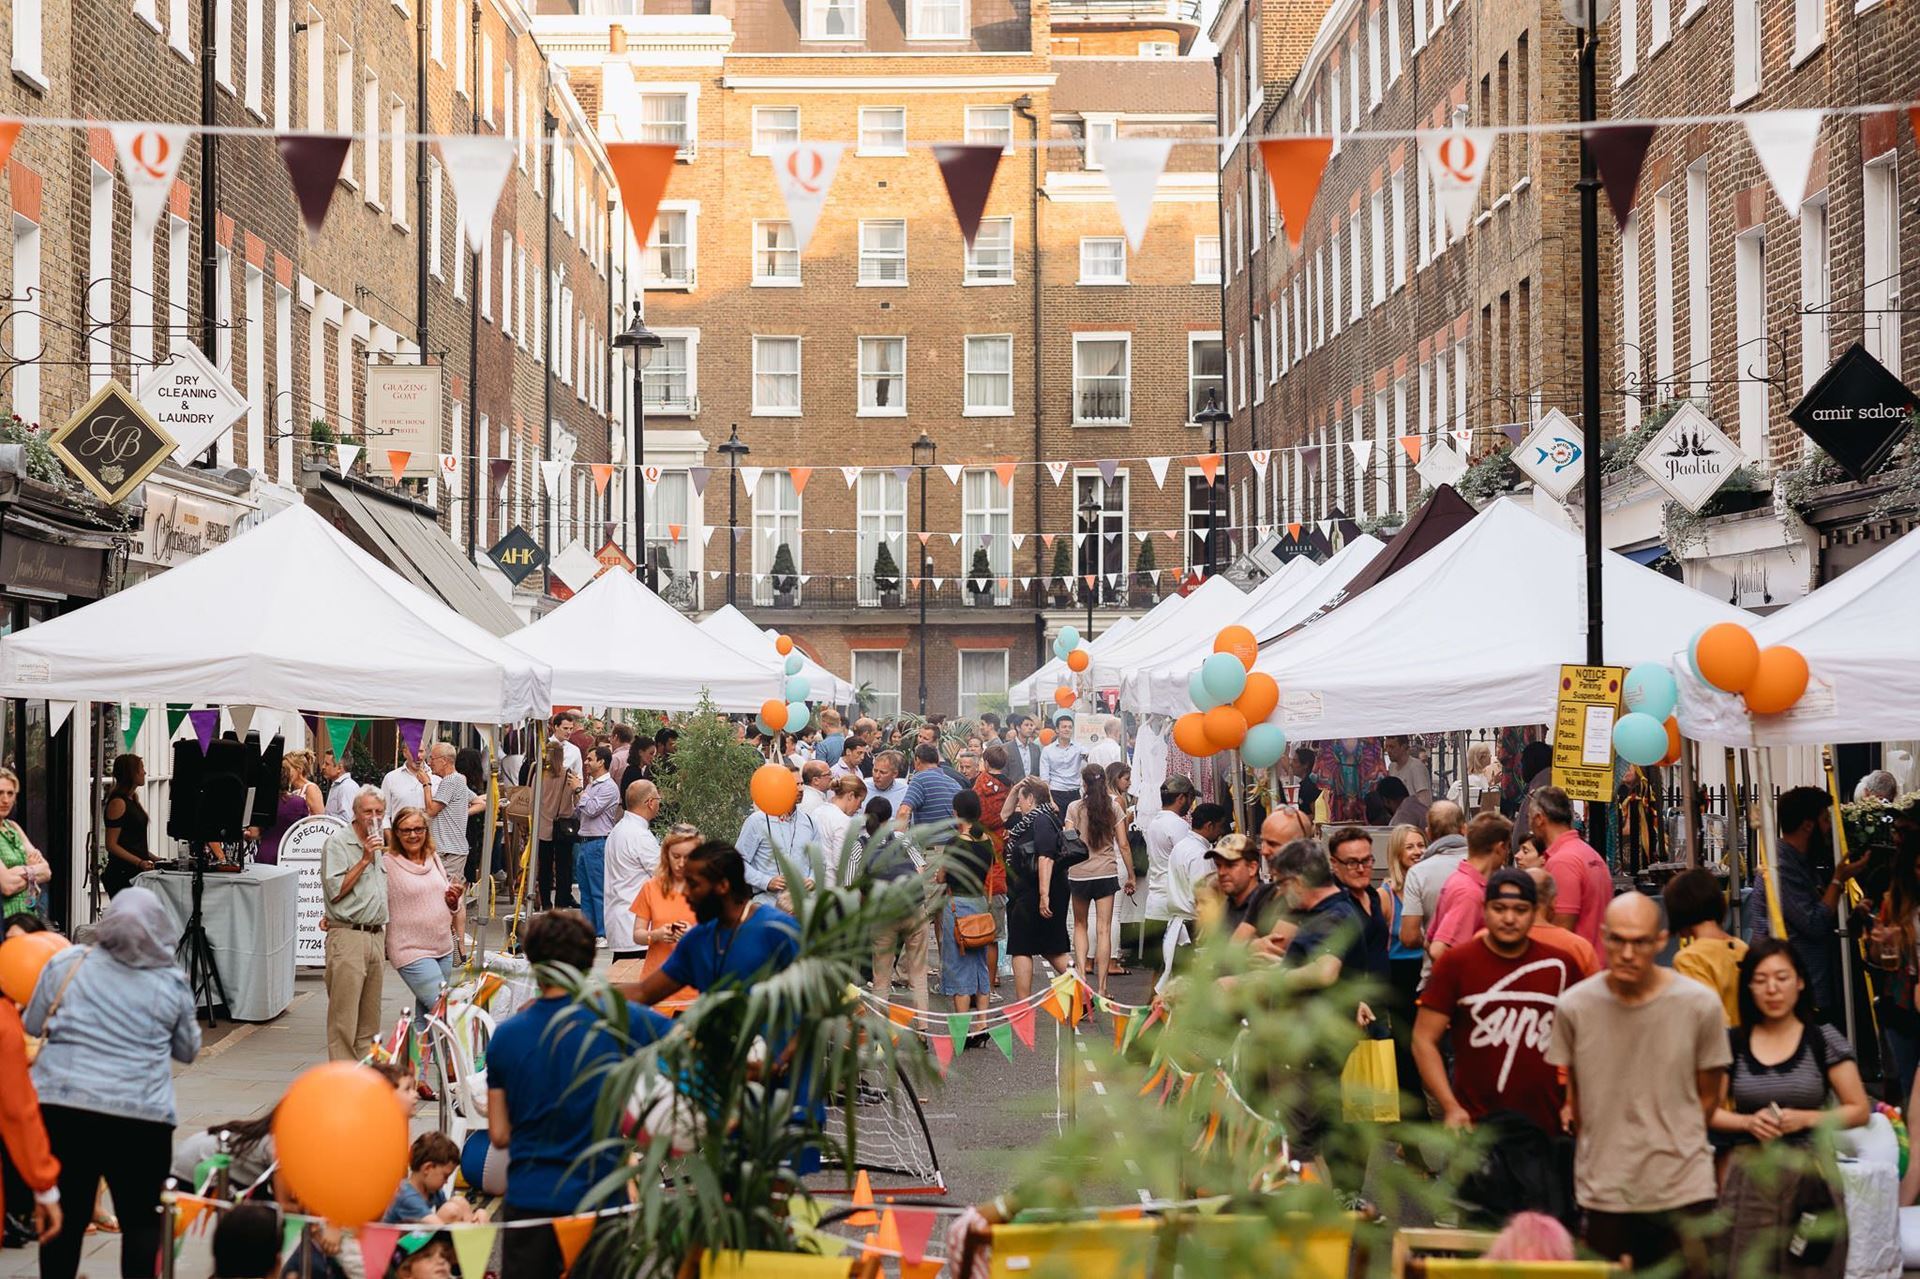 Berkshire Hathaway HomeServices Kay & Co is proud to support the Marylebone Association Marylebone Summer Street Party - Kay & Co